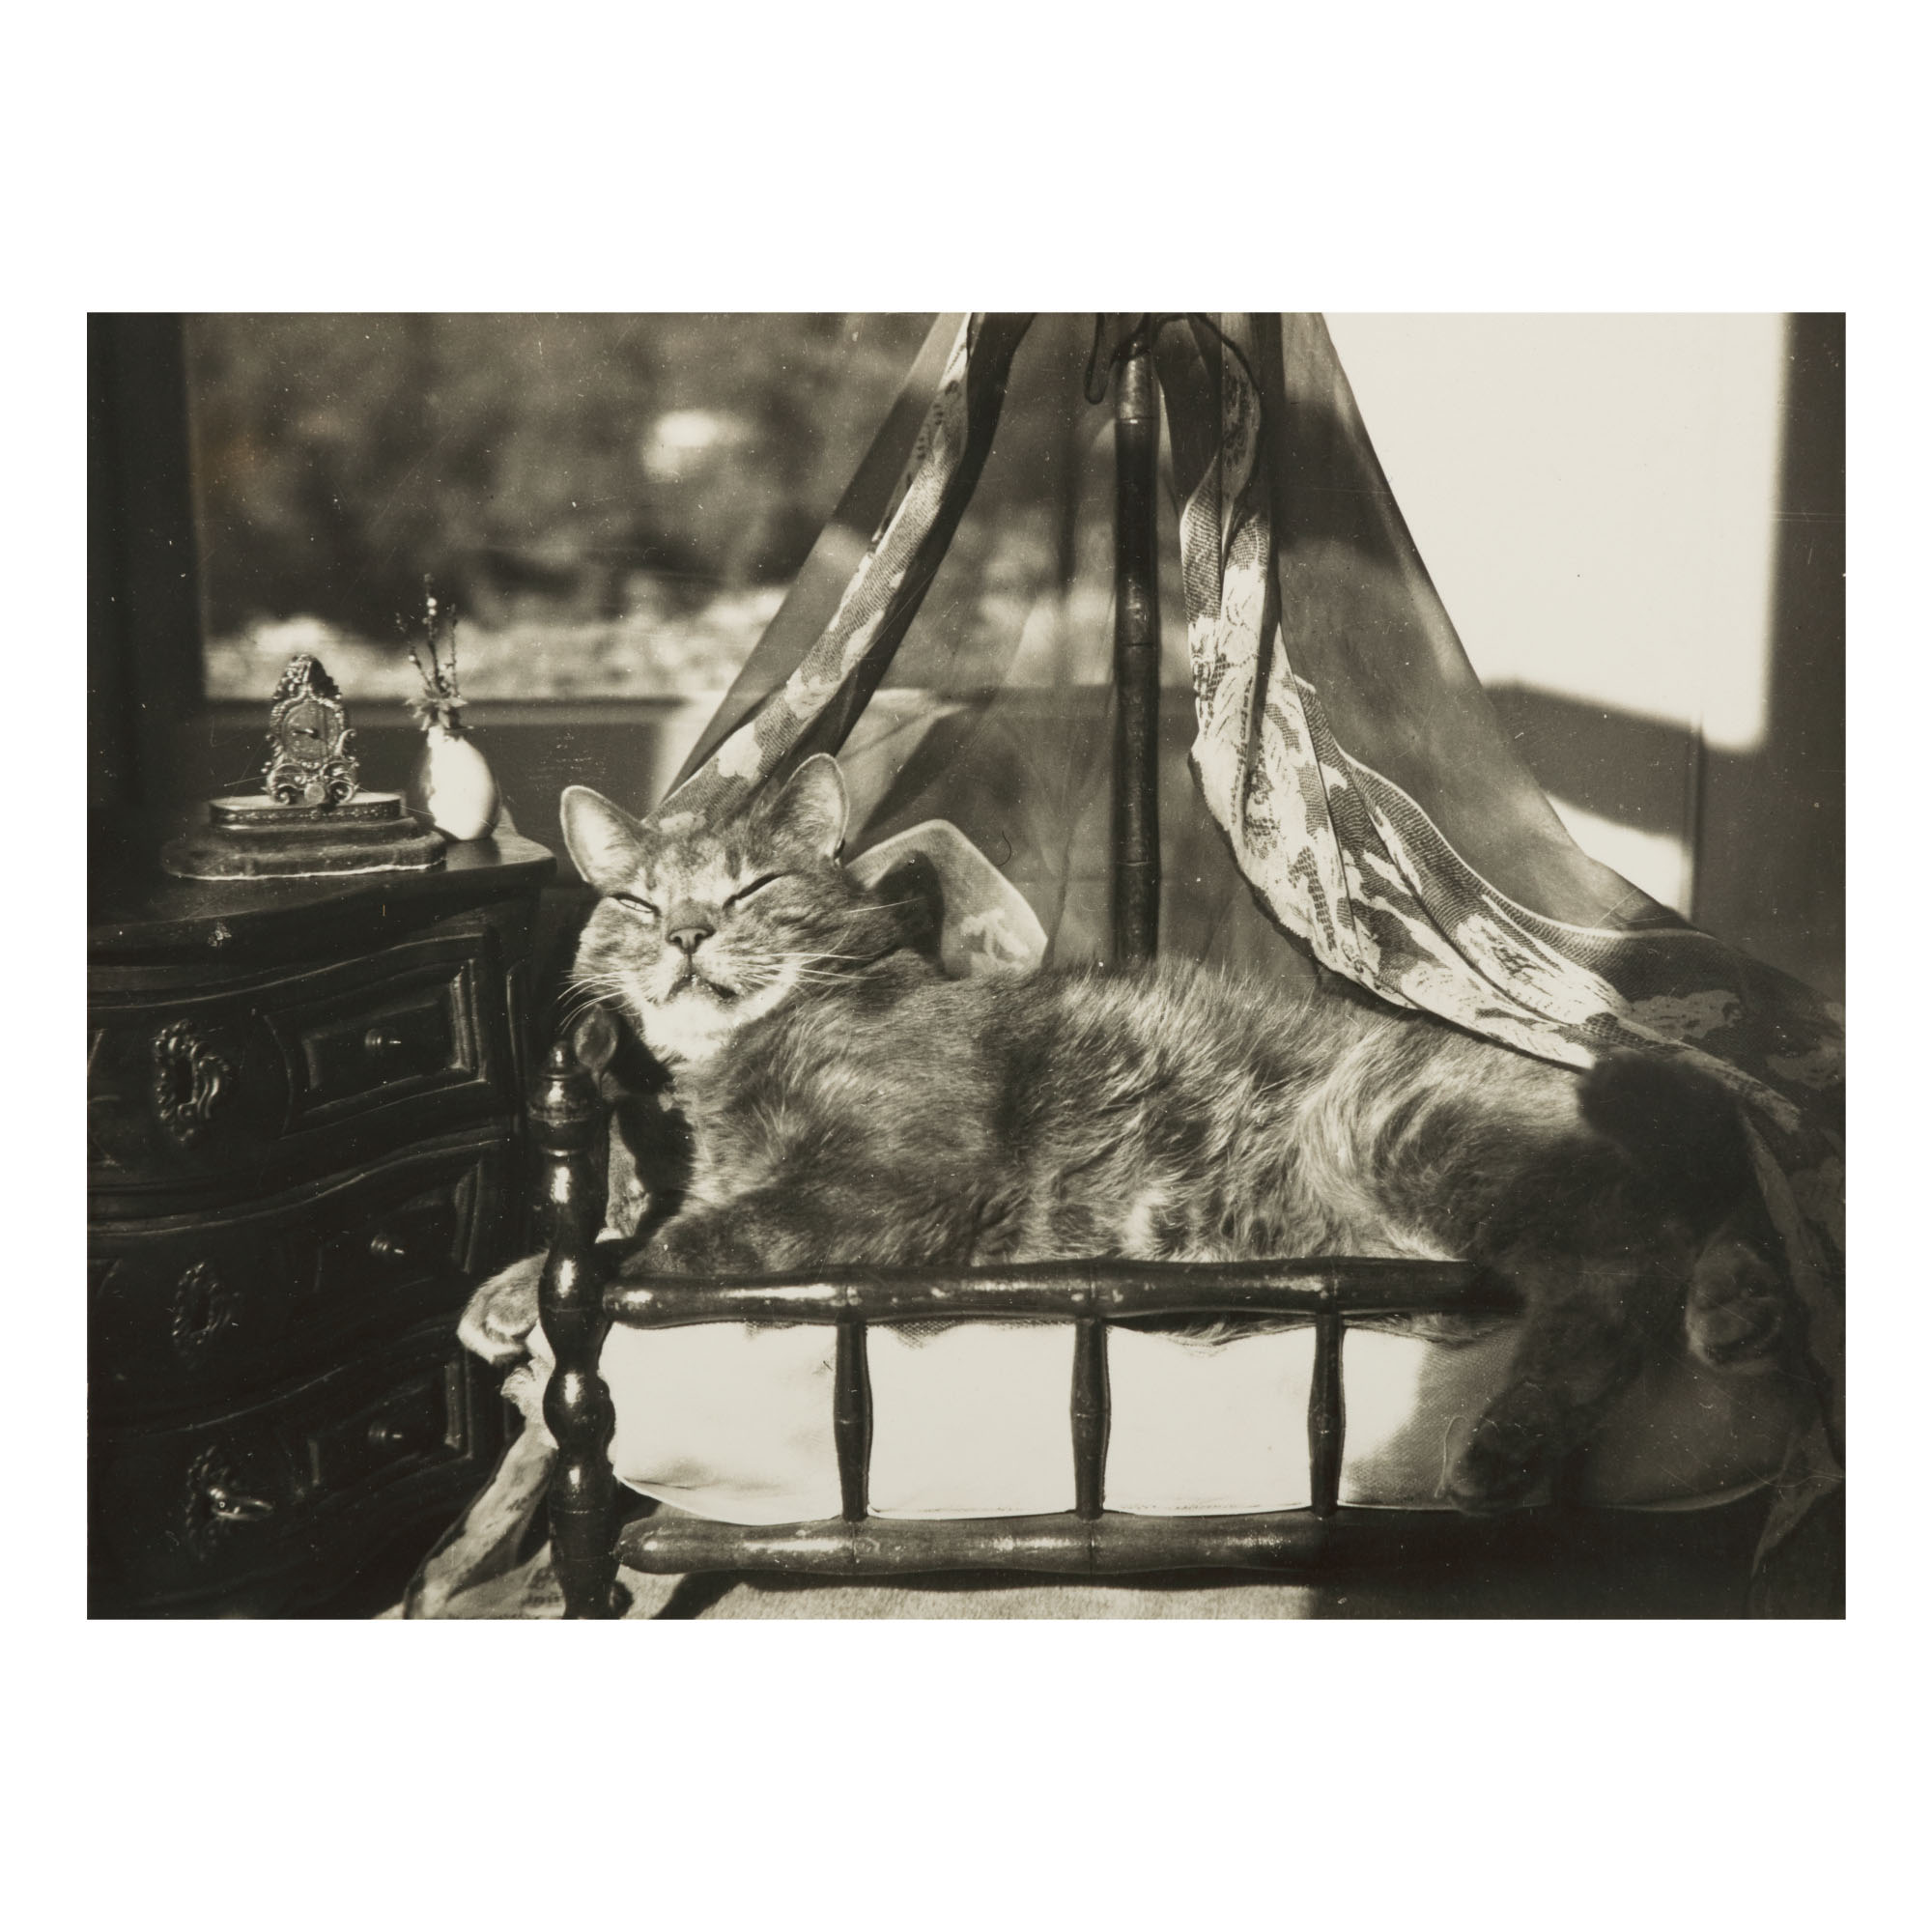 La Chambre du Chat, 1940, by Claude Cahun. Image courtesy of Sotheby's